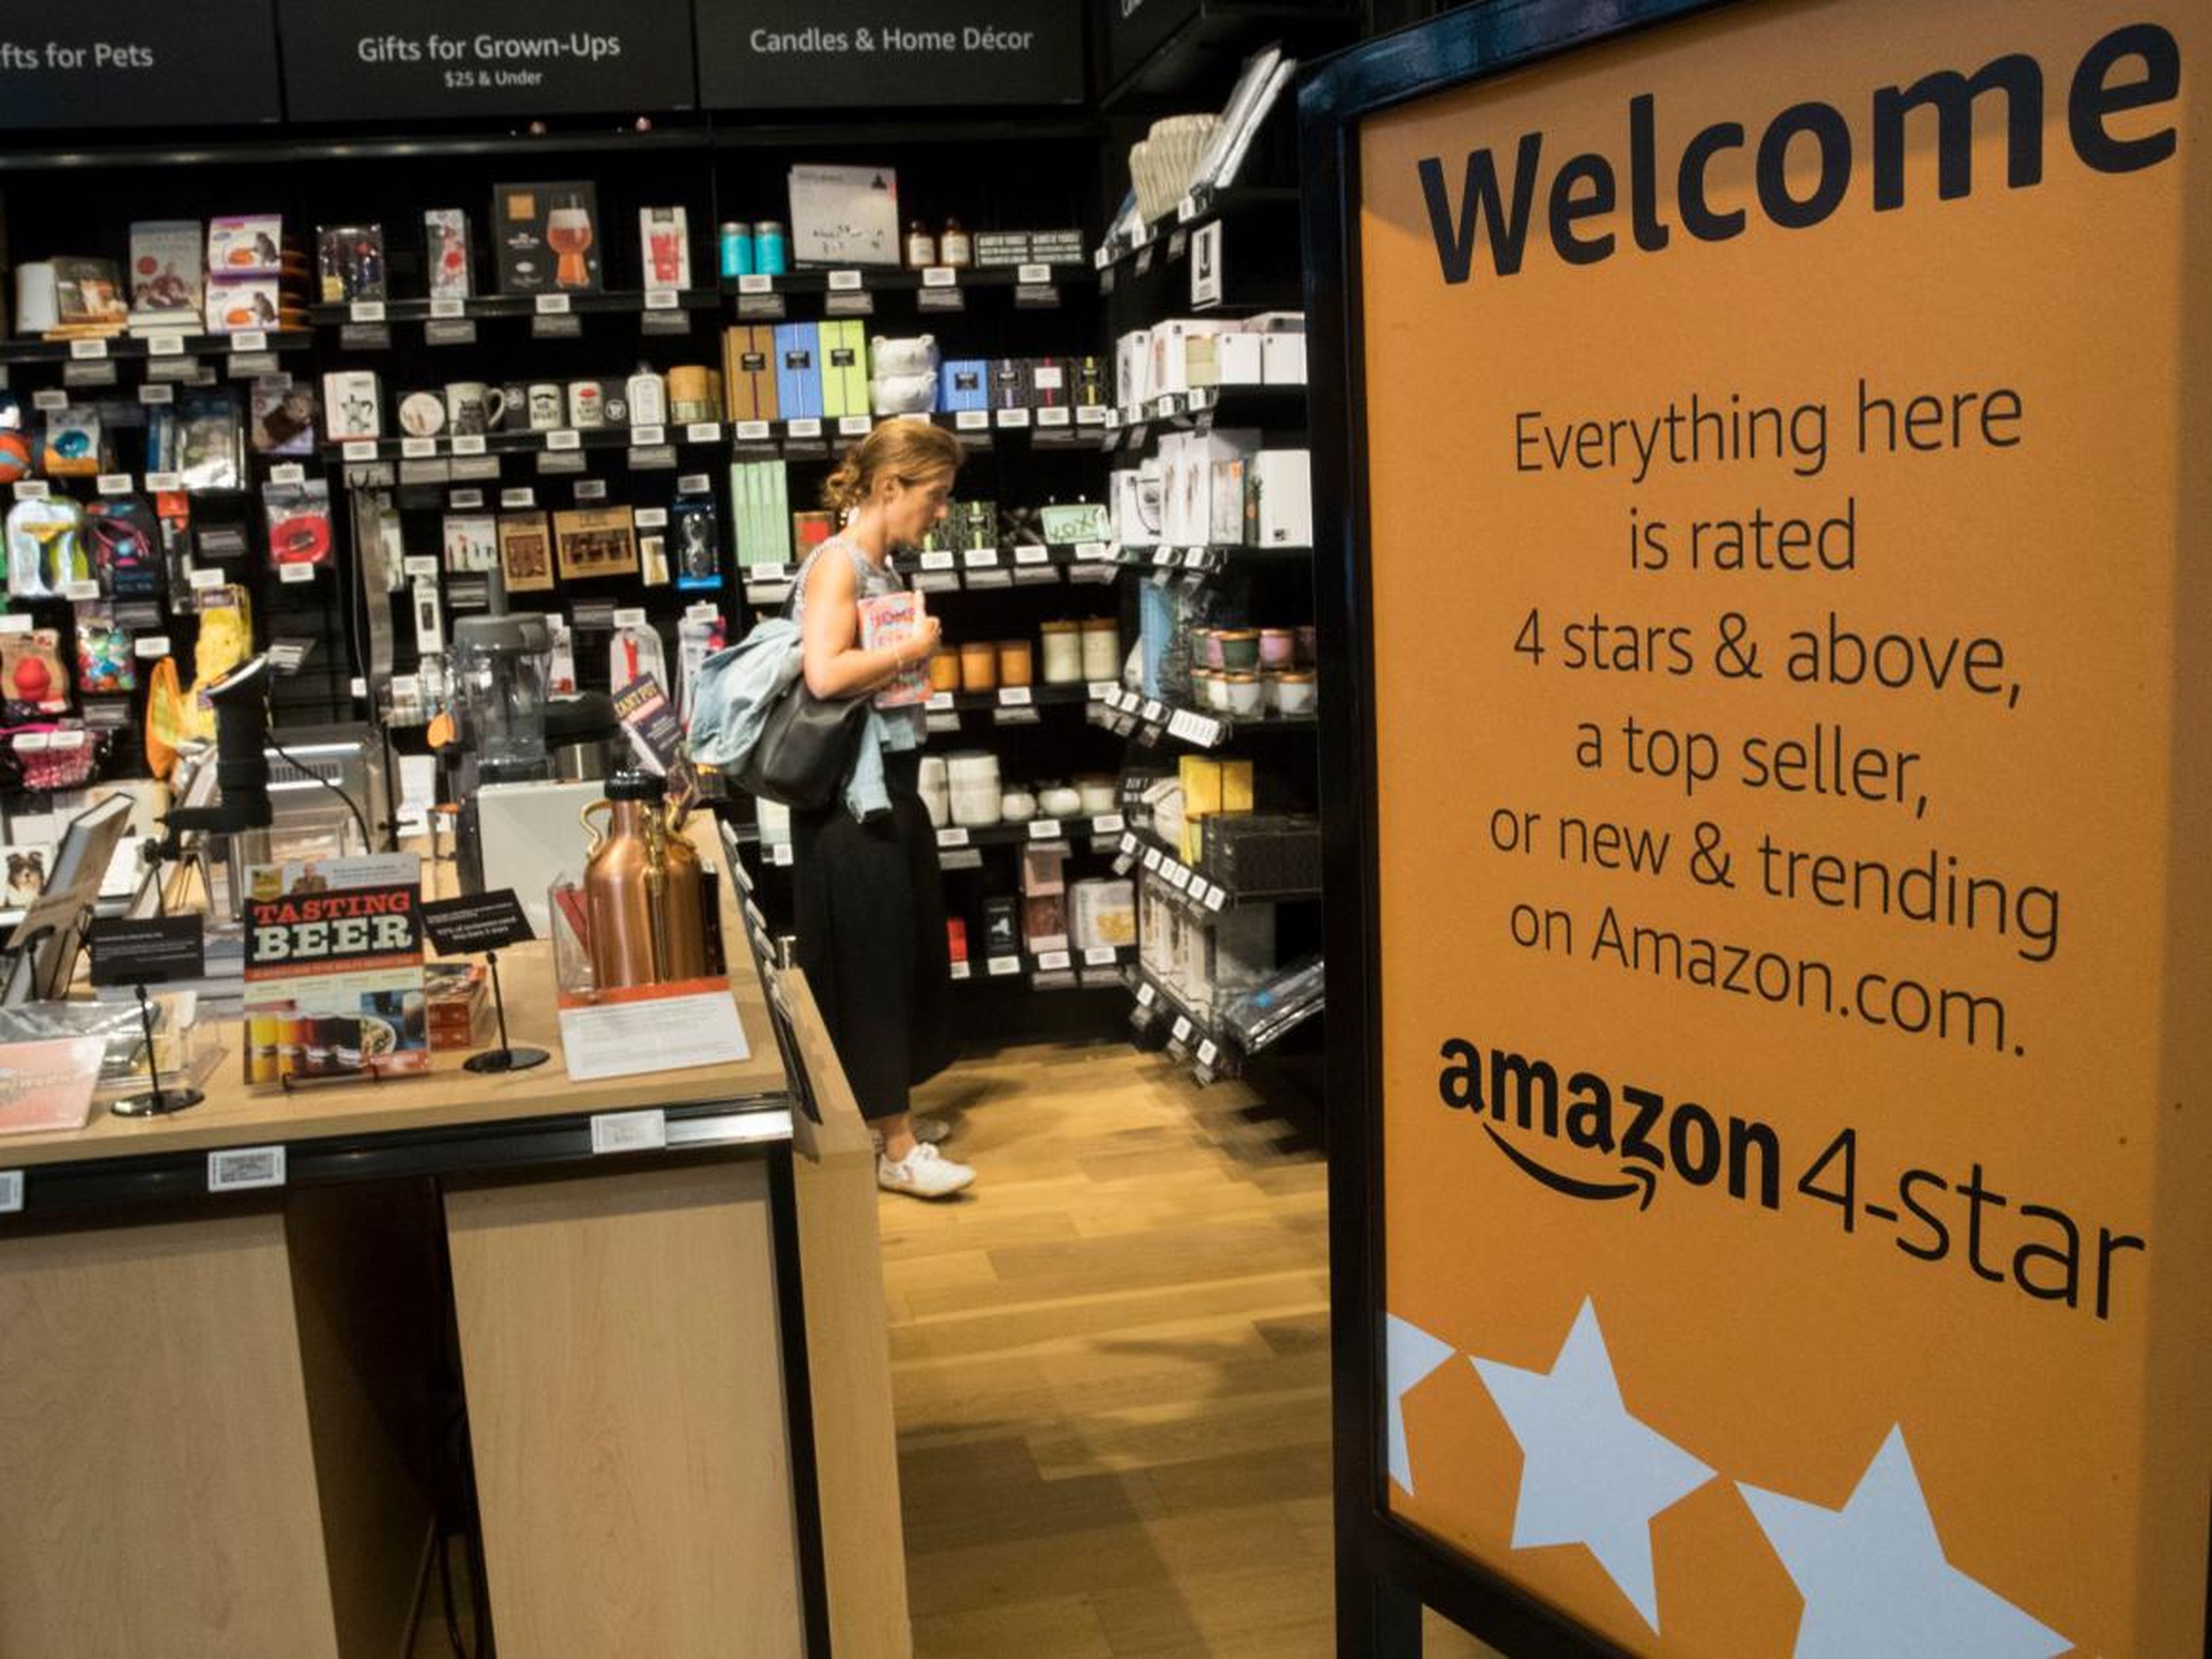 Amazon 4-star is an Amazon store concept that puts the ratings front and center.